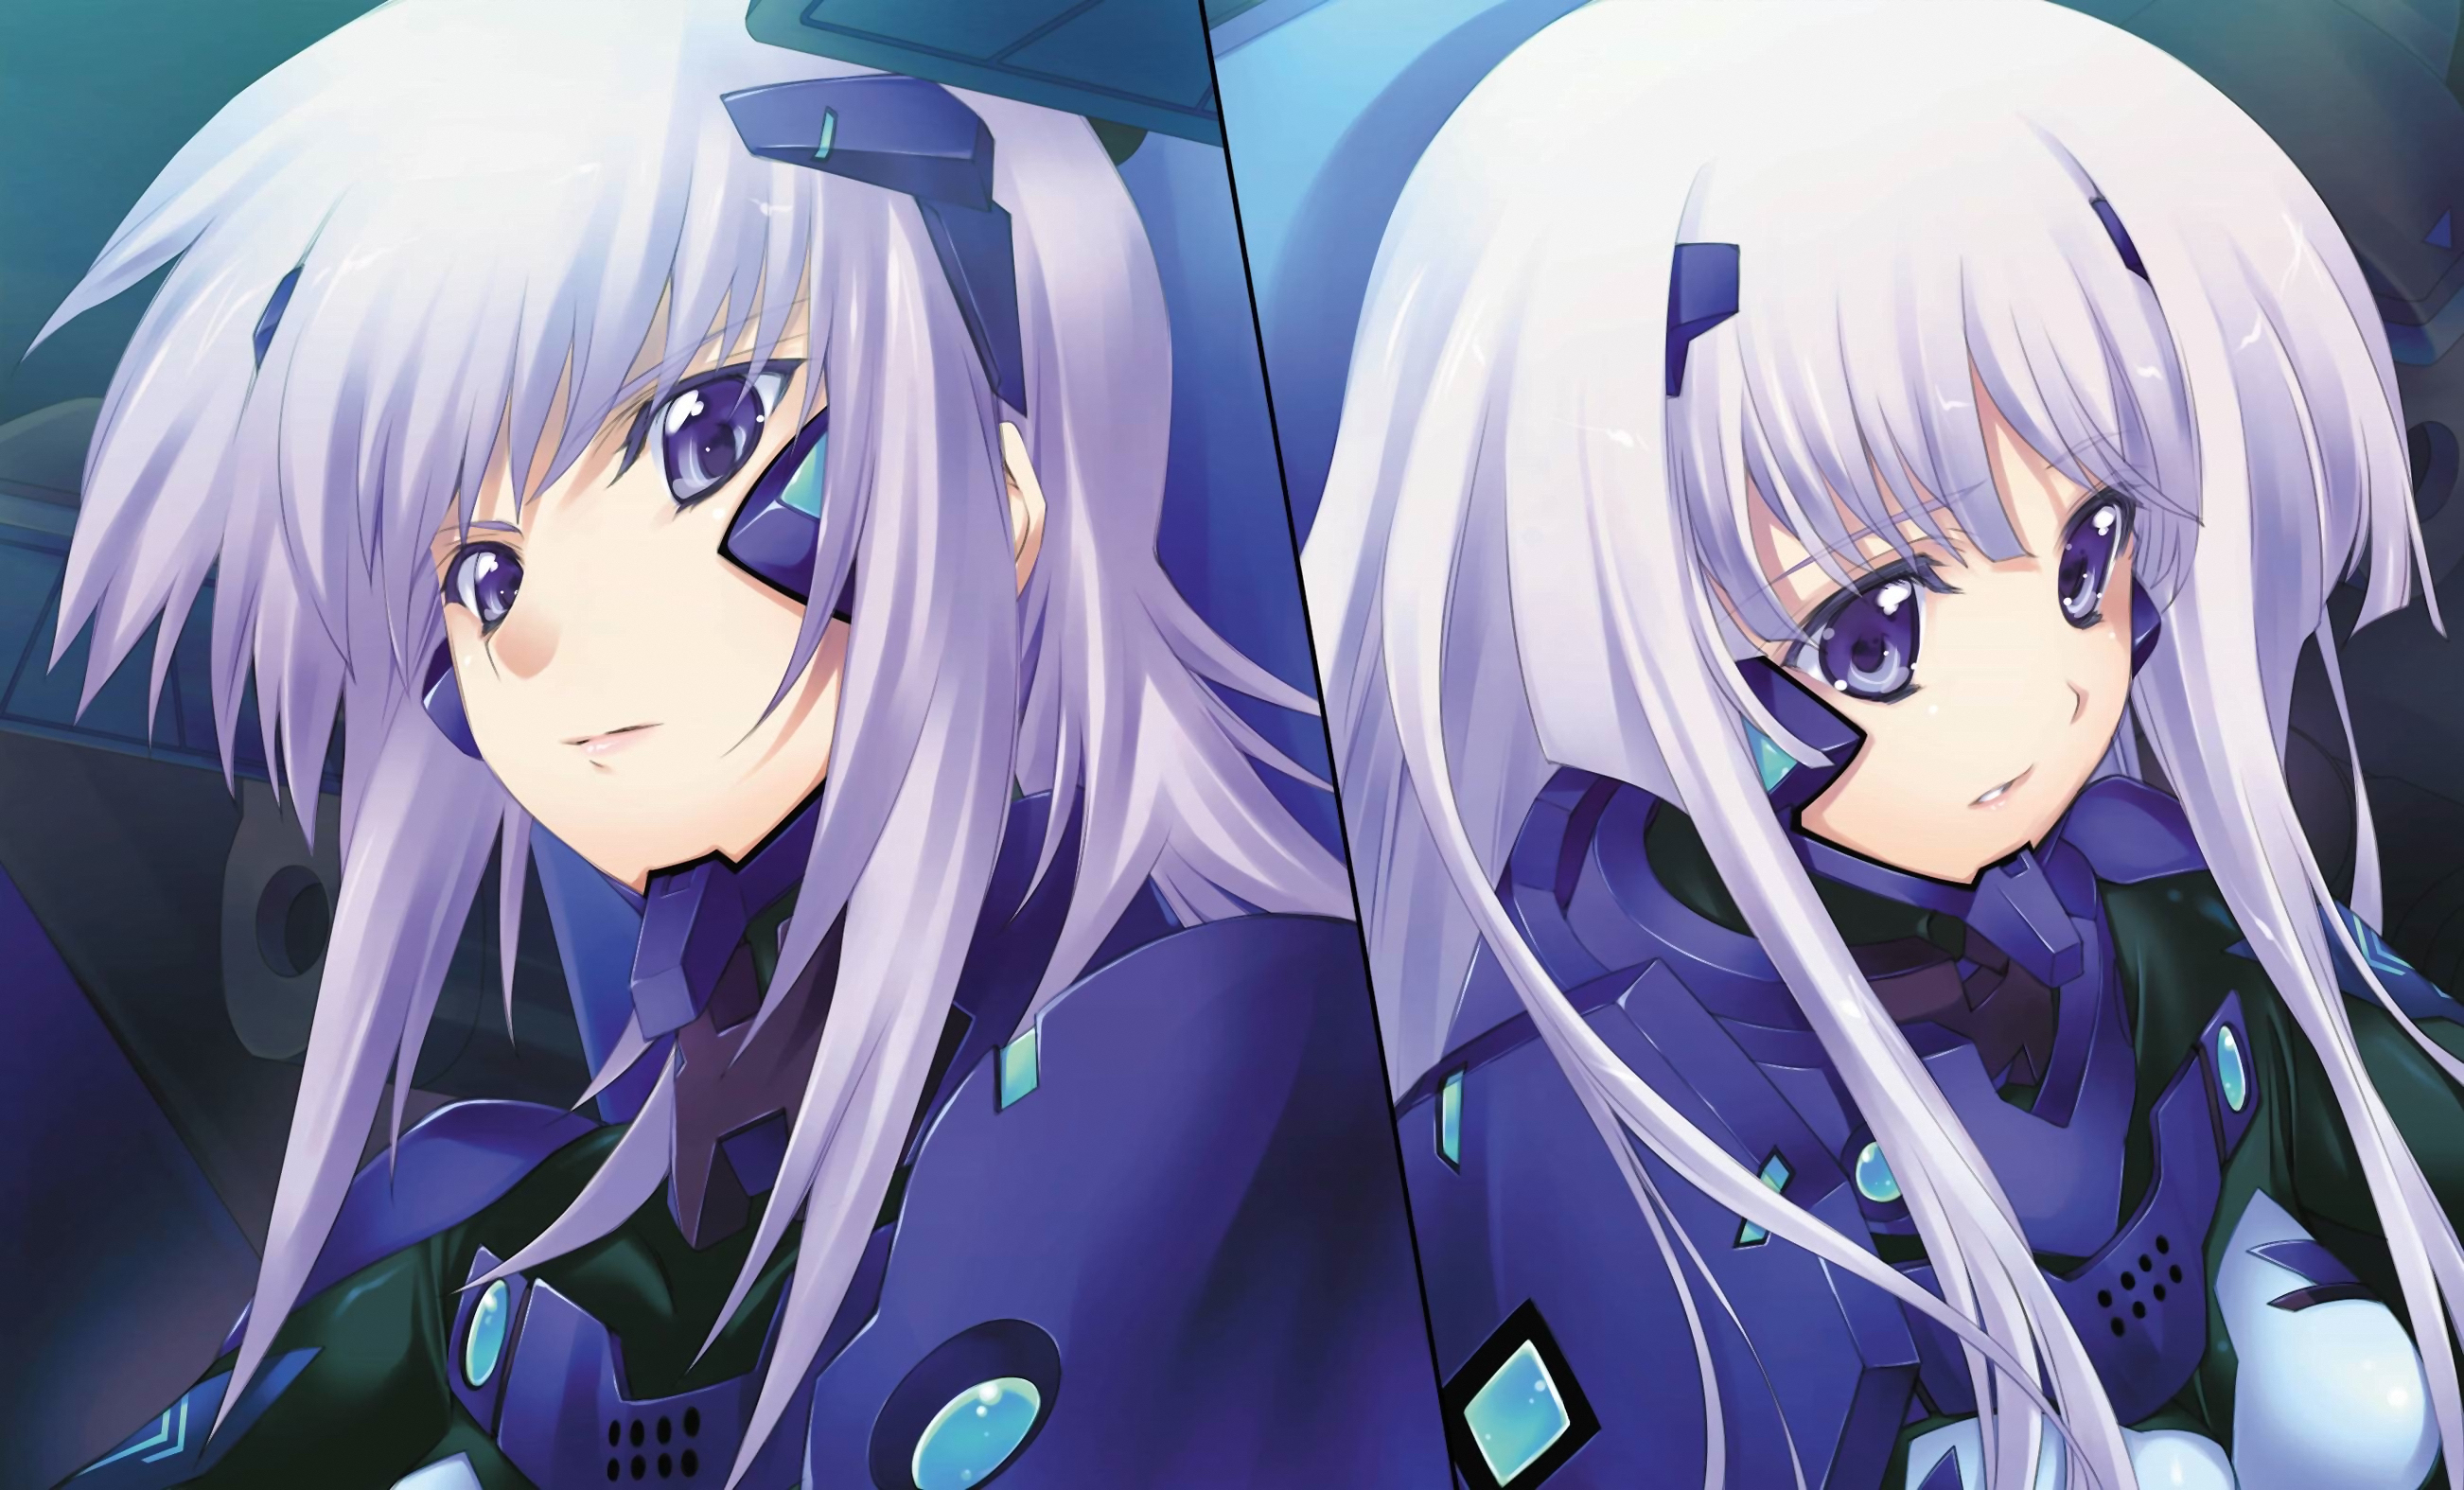 Muv-Luv Alternative Hd Characters Wallpapers.